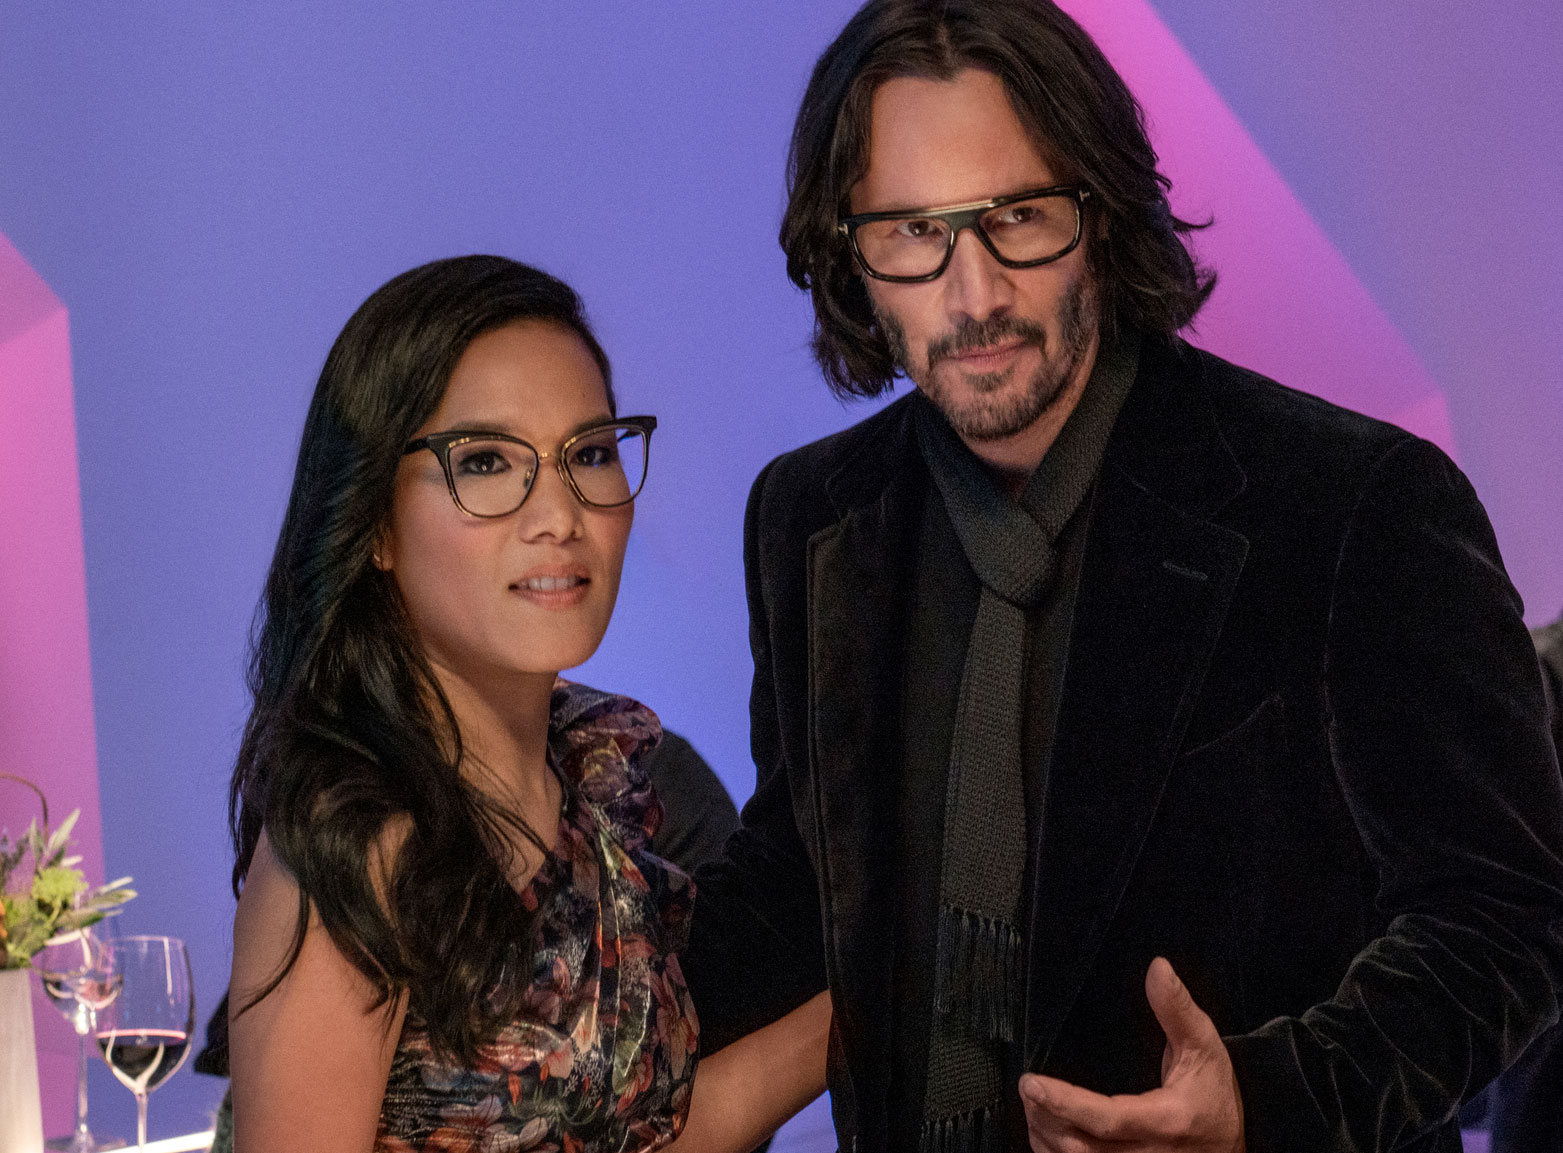 A still from the film Always Be My Maybe: Ali Wong and Keanu Reeves play a well-dressed couple on a date at a fancy restaurant. Photo by Netflix.